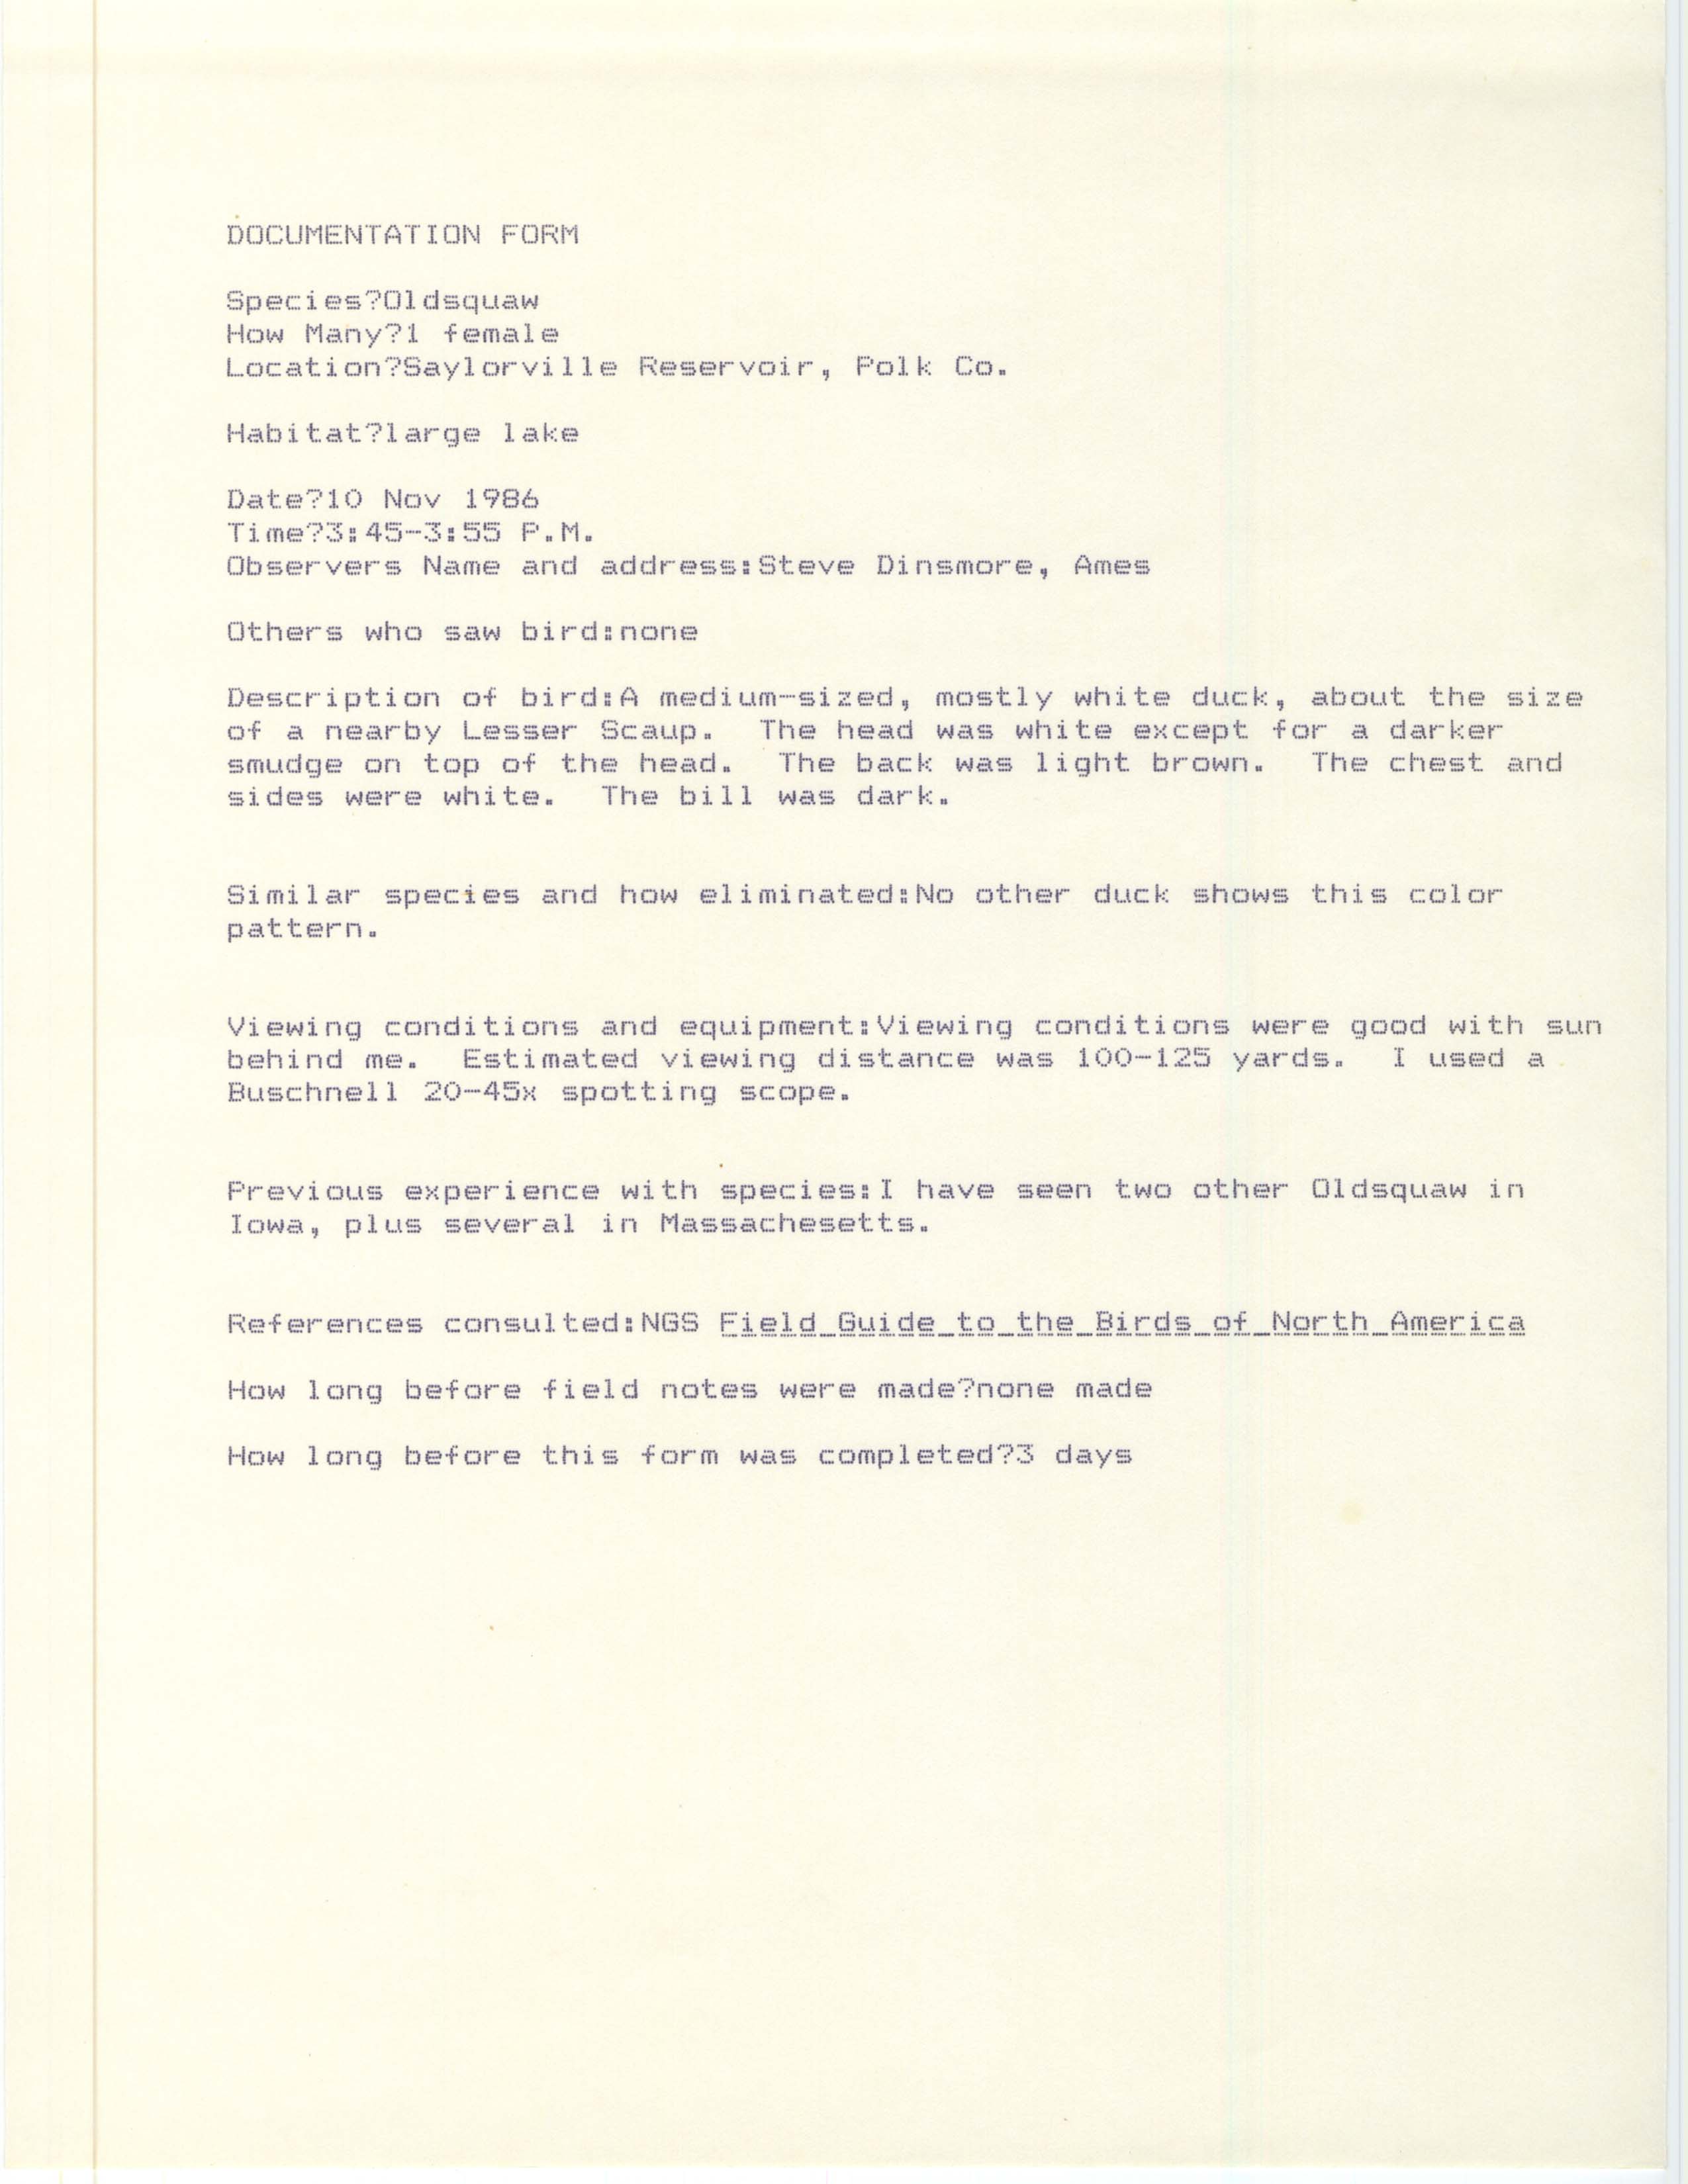 Rare bird documentation form for Long-tailed Duck at Saylorville Reservoir, 1986